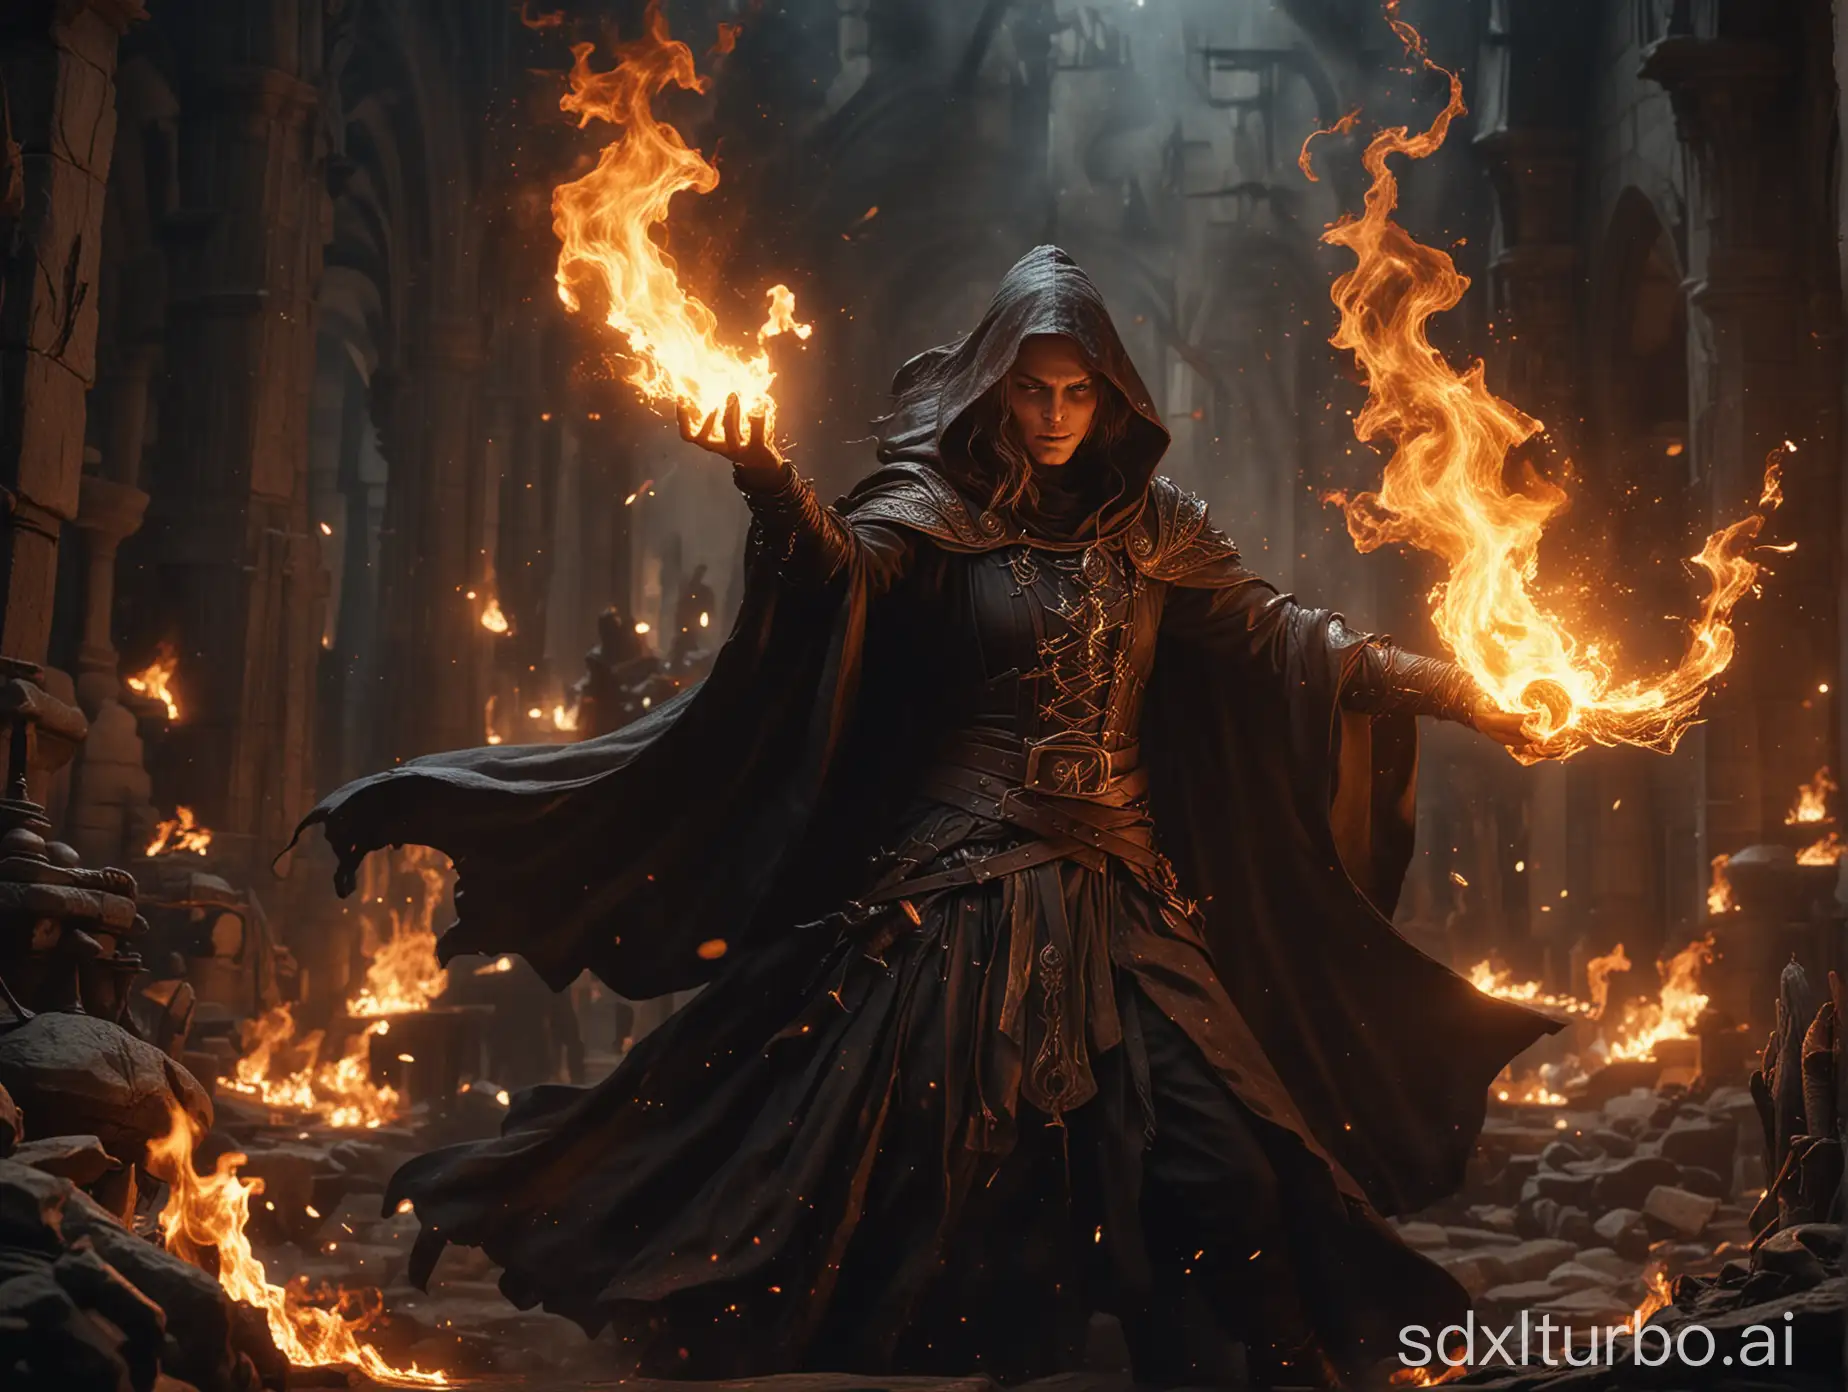 A scene with flickering flames, the dark sorcerer is fighting against the herald of light, and both are casting spells